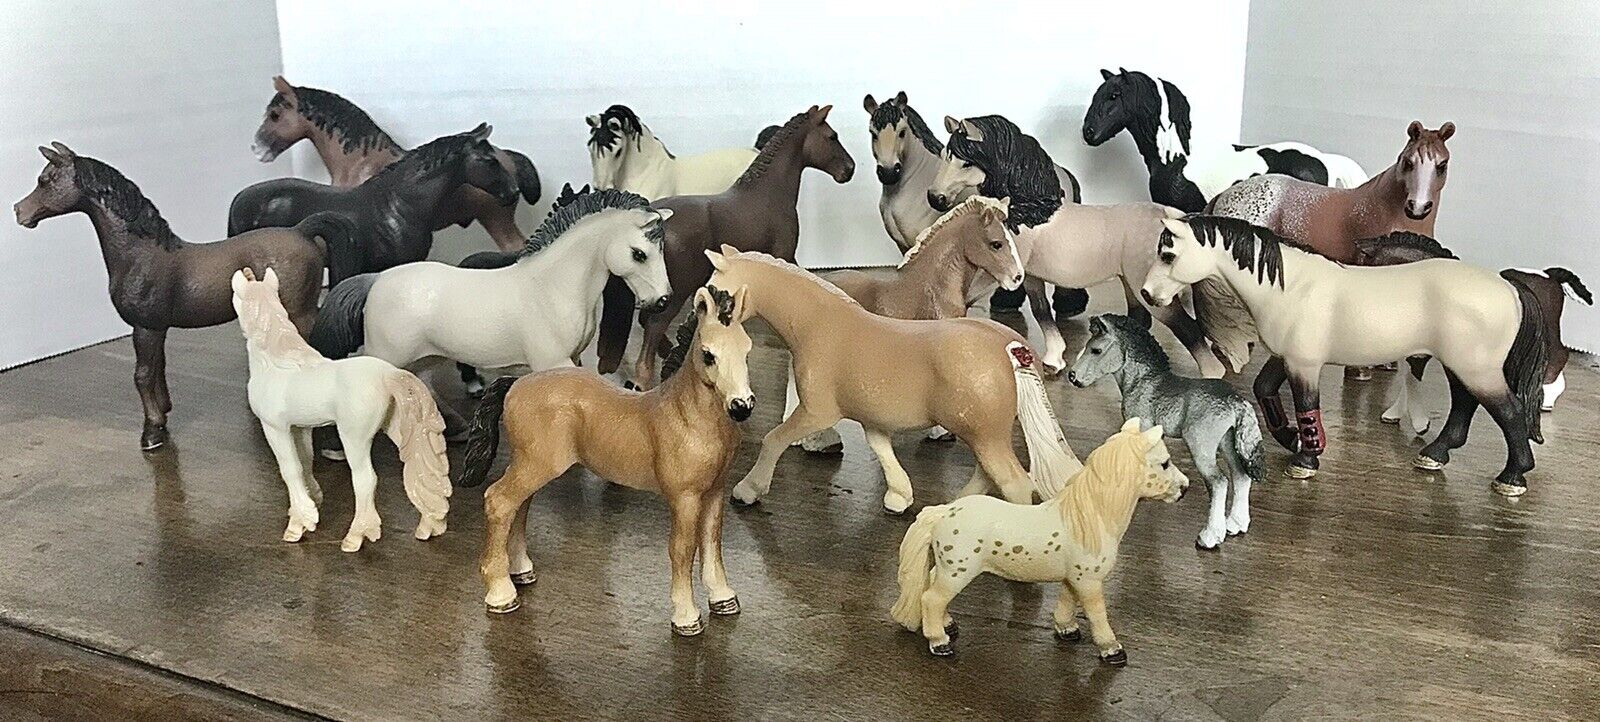 Large Schleich Horse Lot from 2014-2016 - Retired and Some Rare - 19 in Total